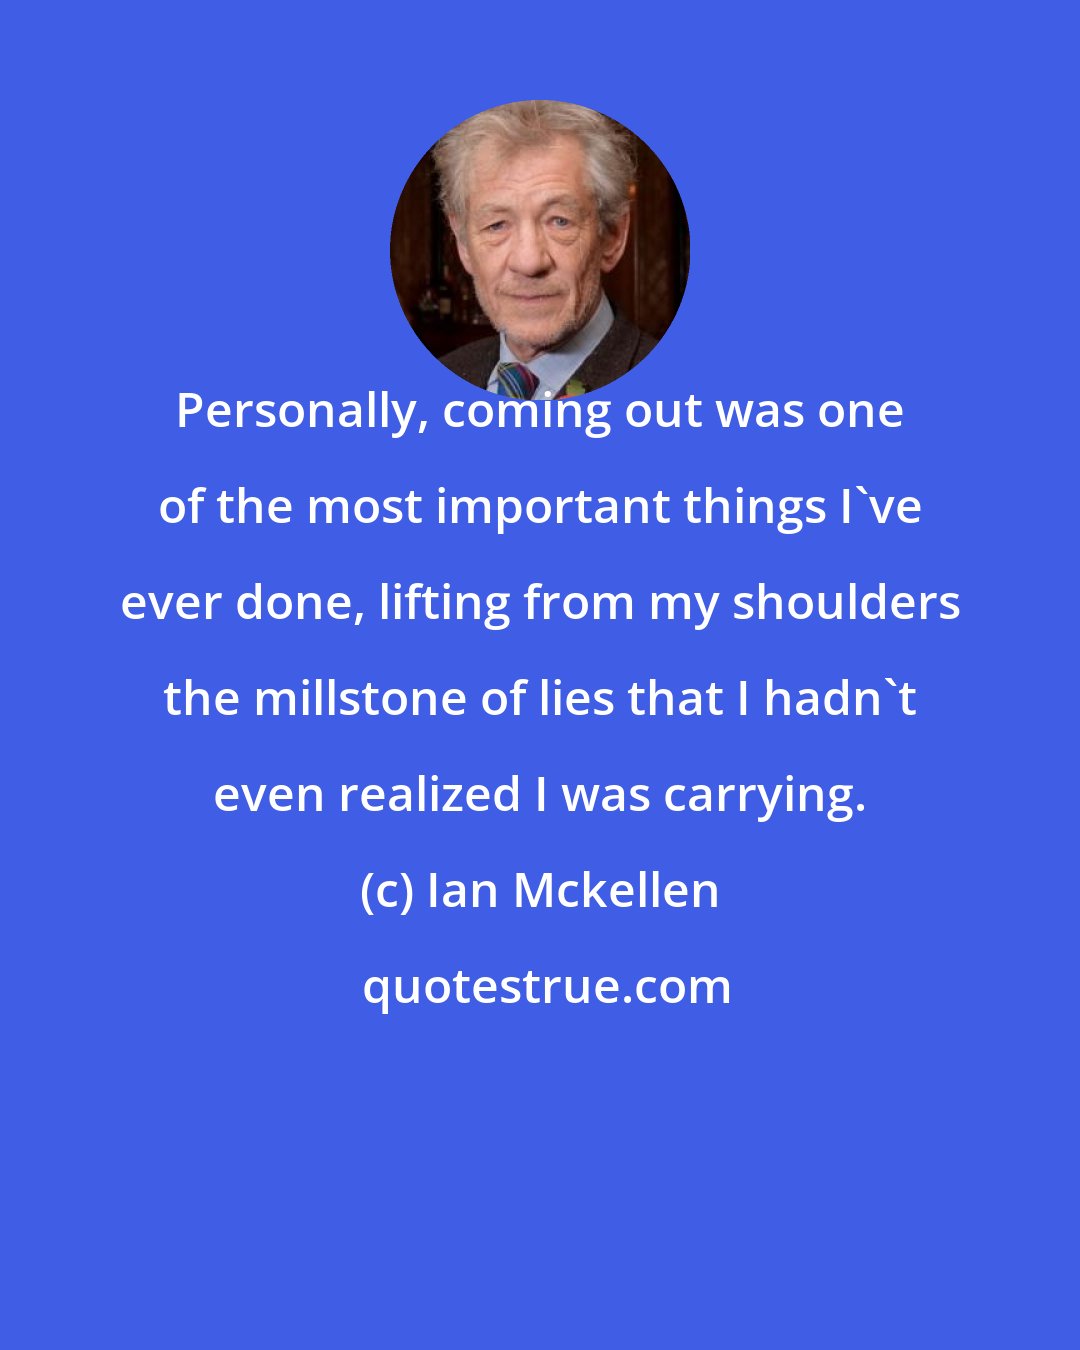 Ian Mckellen: Personally, coming out was one of the most important things I've ever done, lifting from my shoulders the millstone of lies that I hadn't even realized I was carrying.